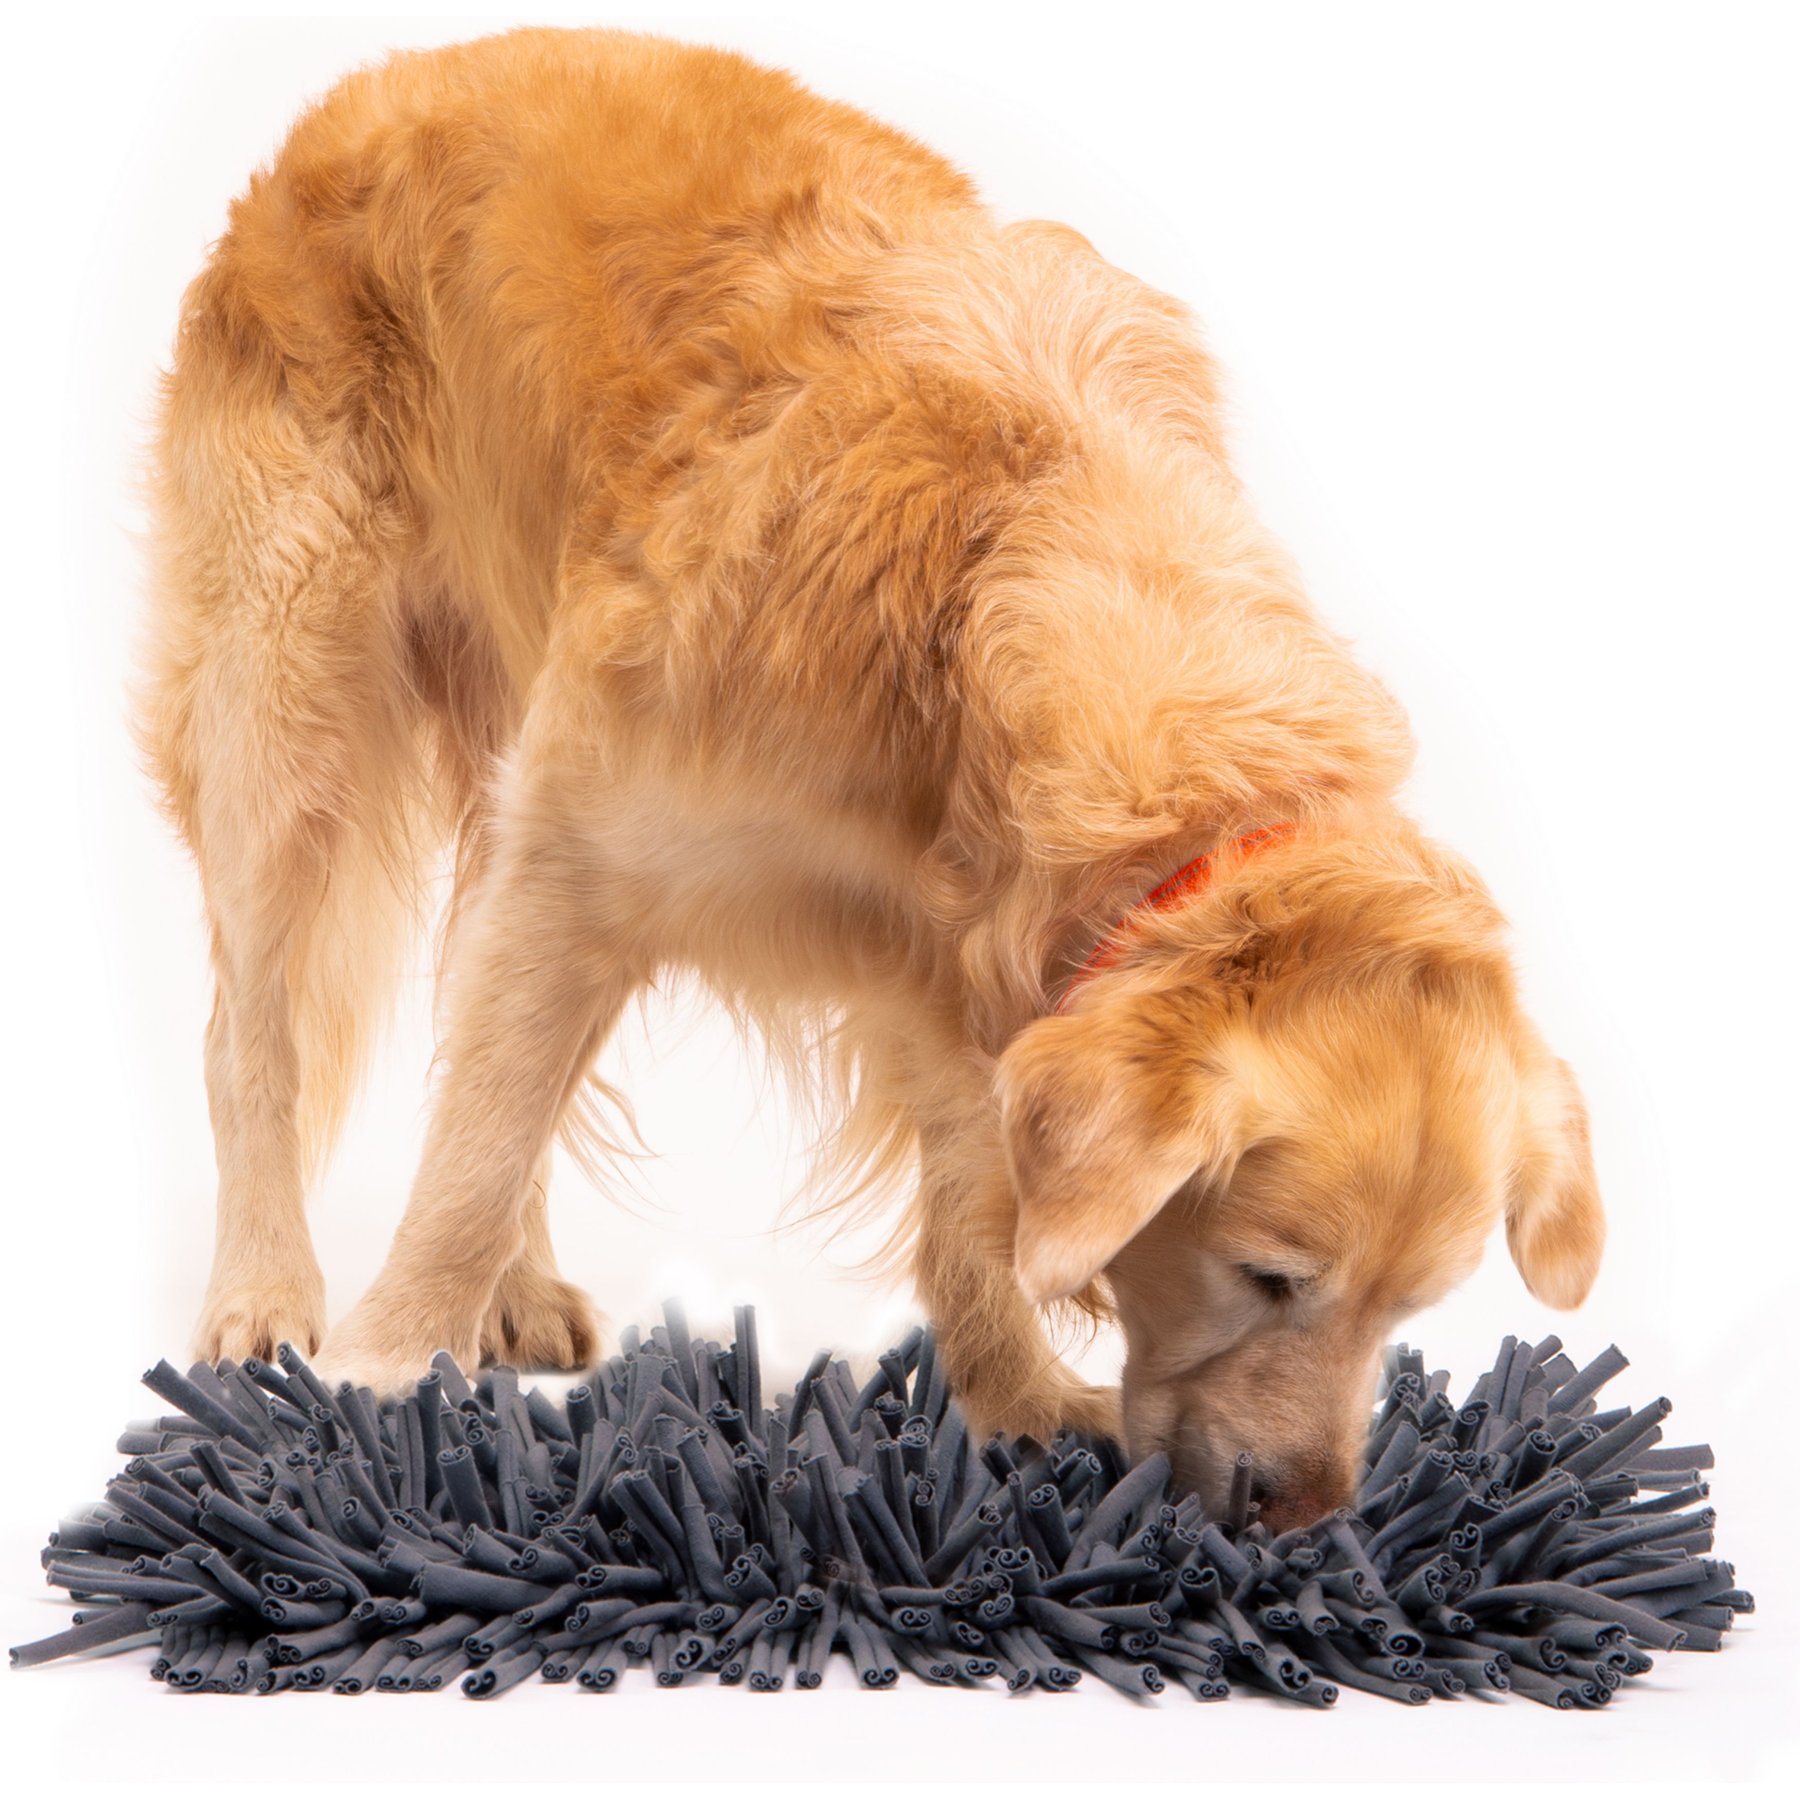 Puppies love snuffle mats! The work-to-eat toys our dog trainers